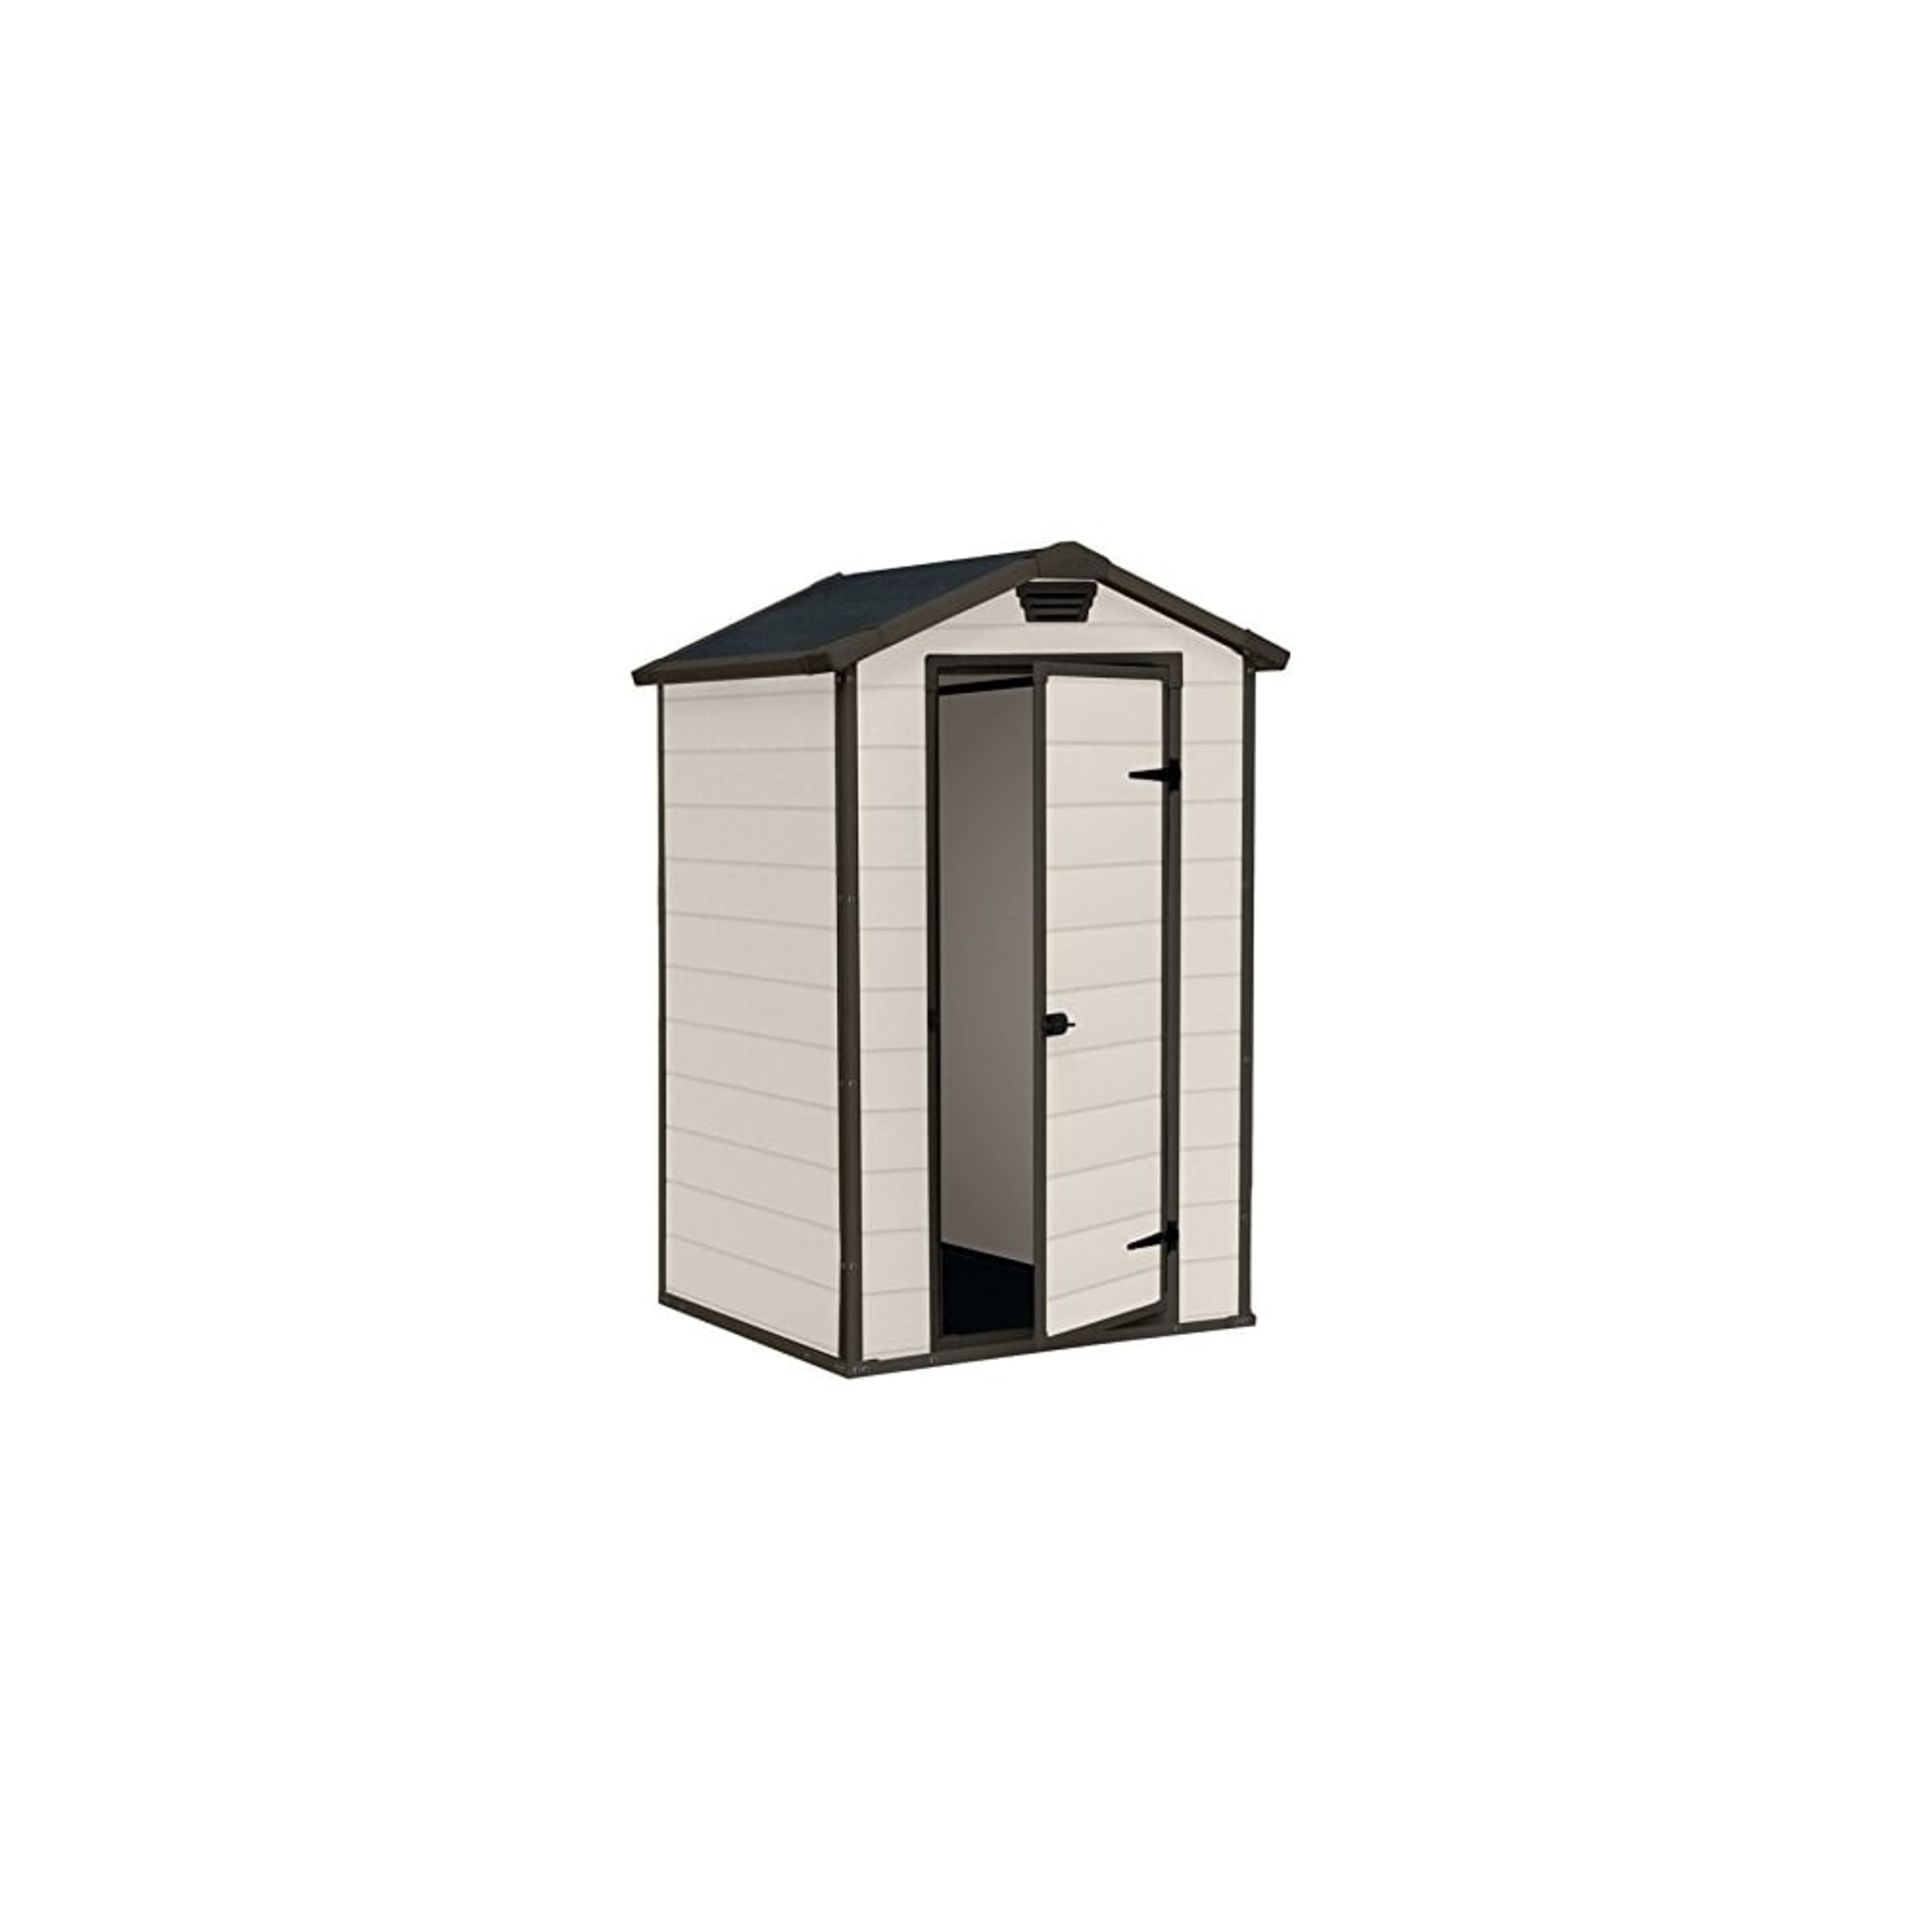 Keter Manor Garden Shed - 6 x 8ft